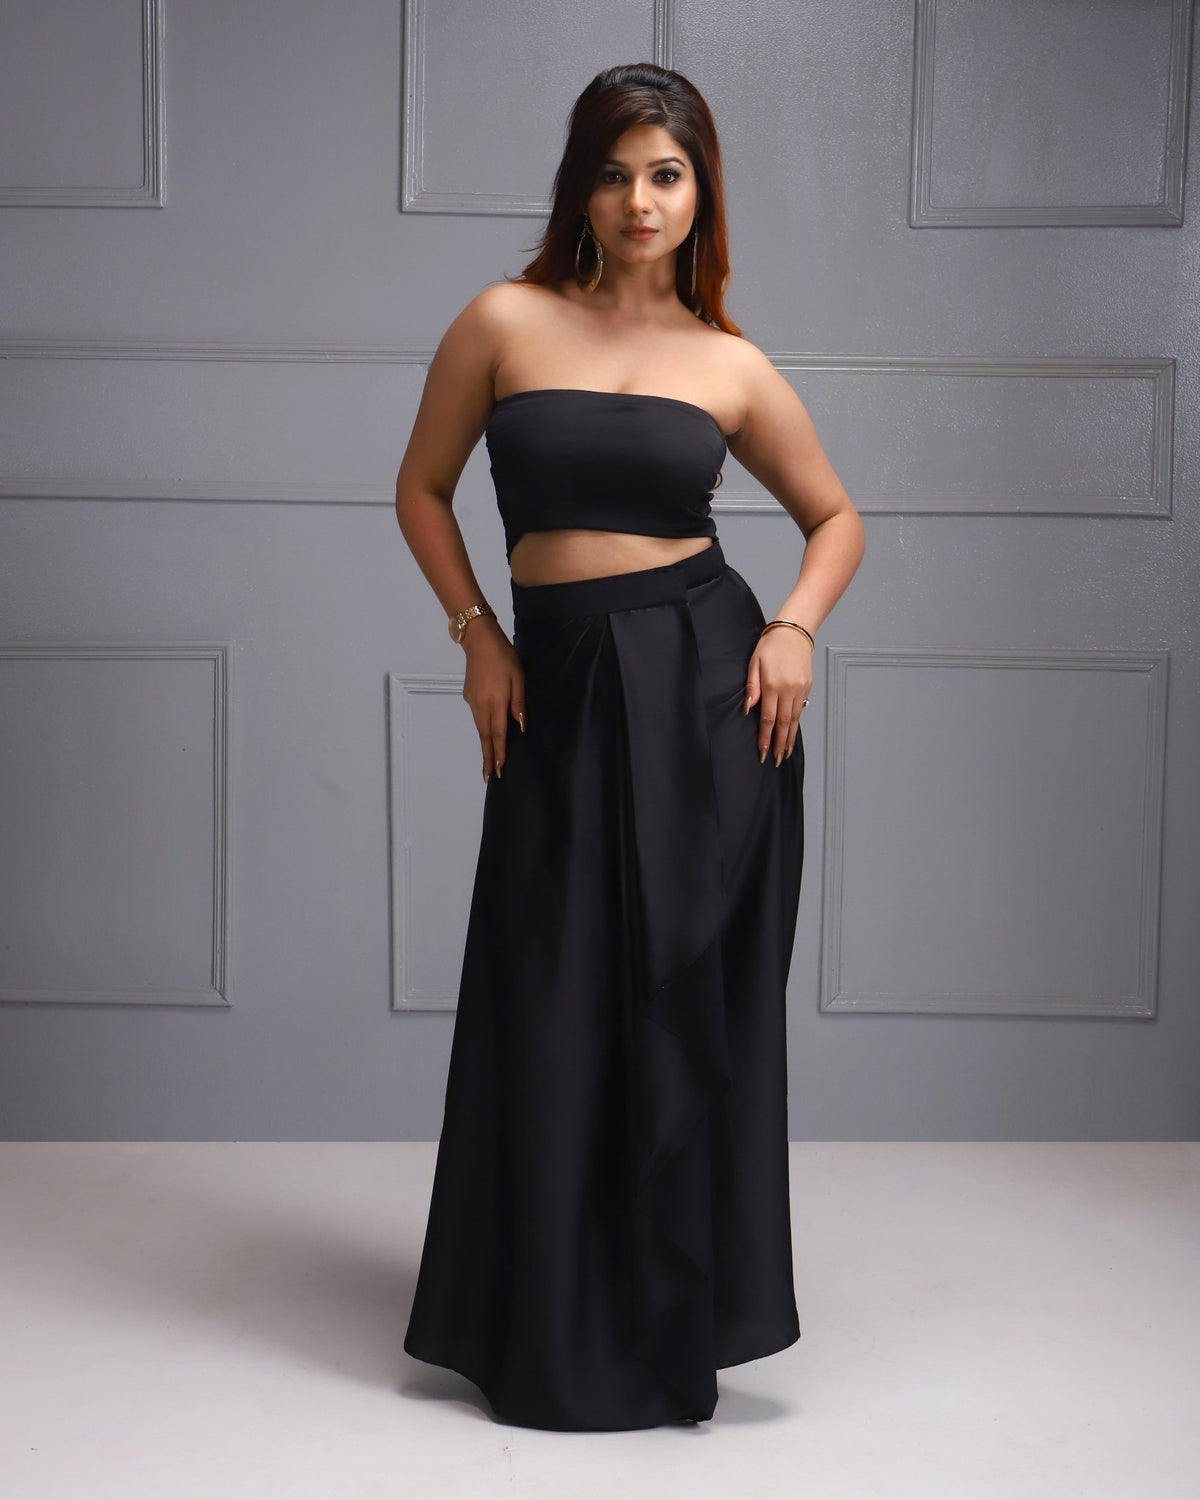 Trendy Women's Fashion, Black Strapless Top, Majisha Crop Top, Maxi Skirt for Women, Chic Contemporary Style, Crop Top and Skirt Co Ord